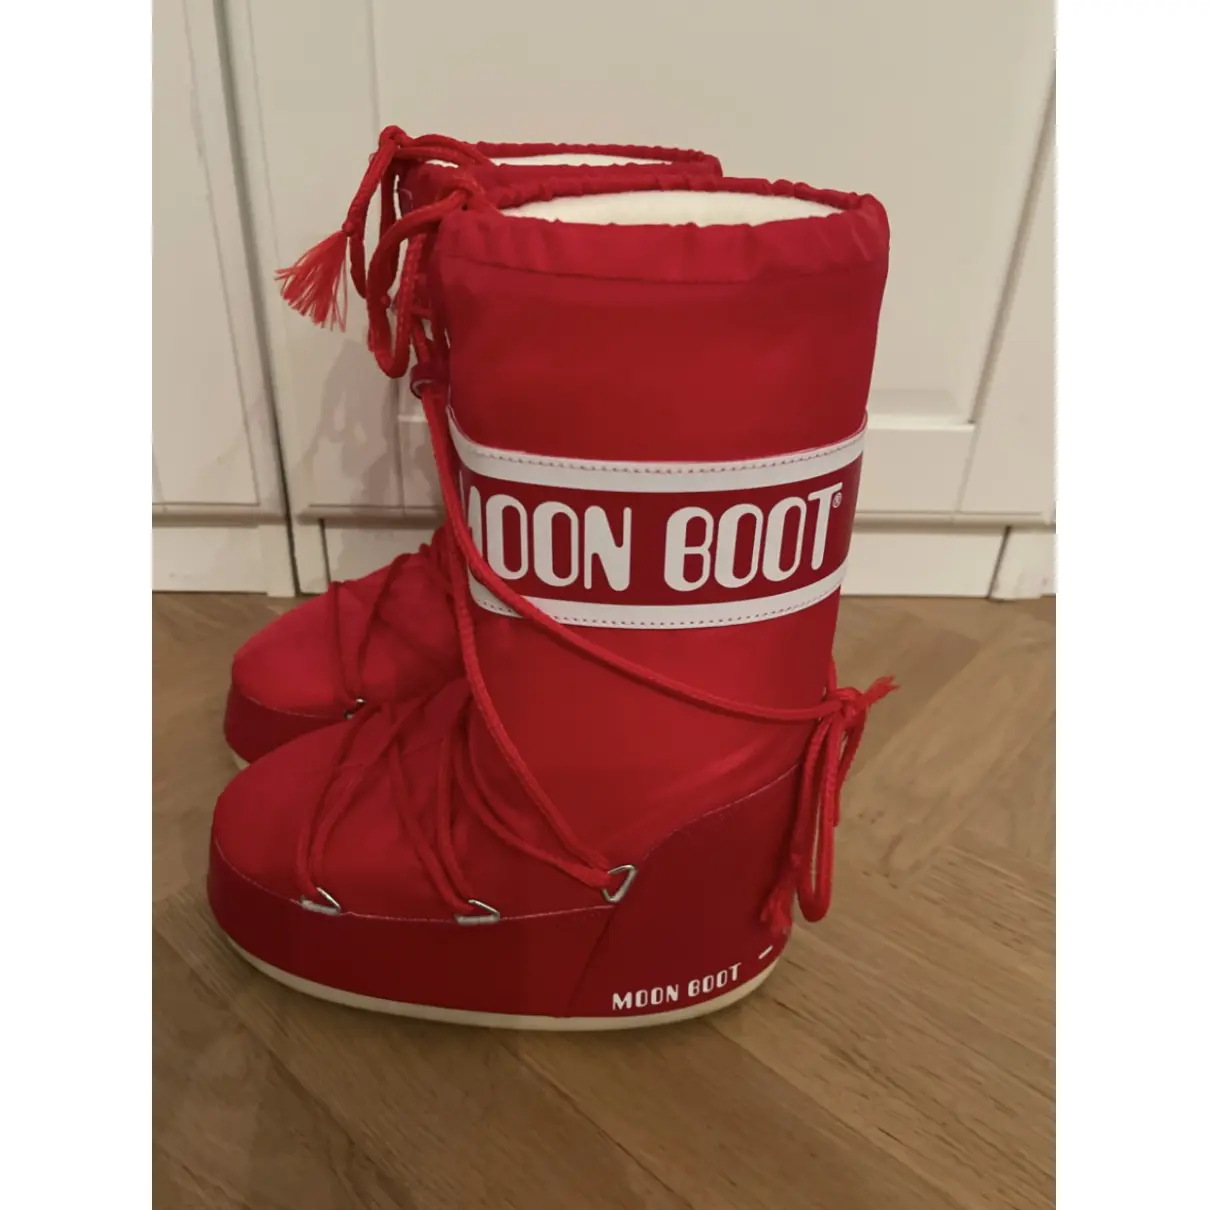 Boots Moon Boot